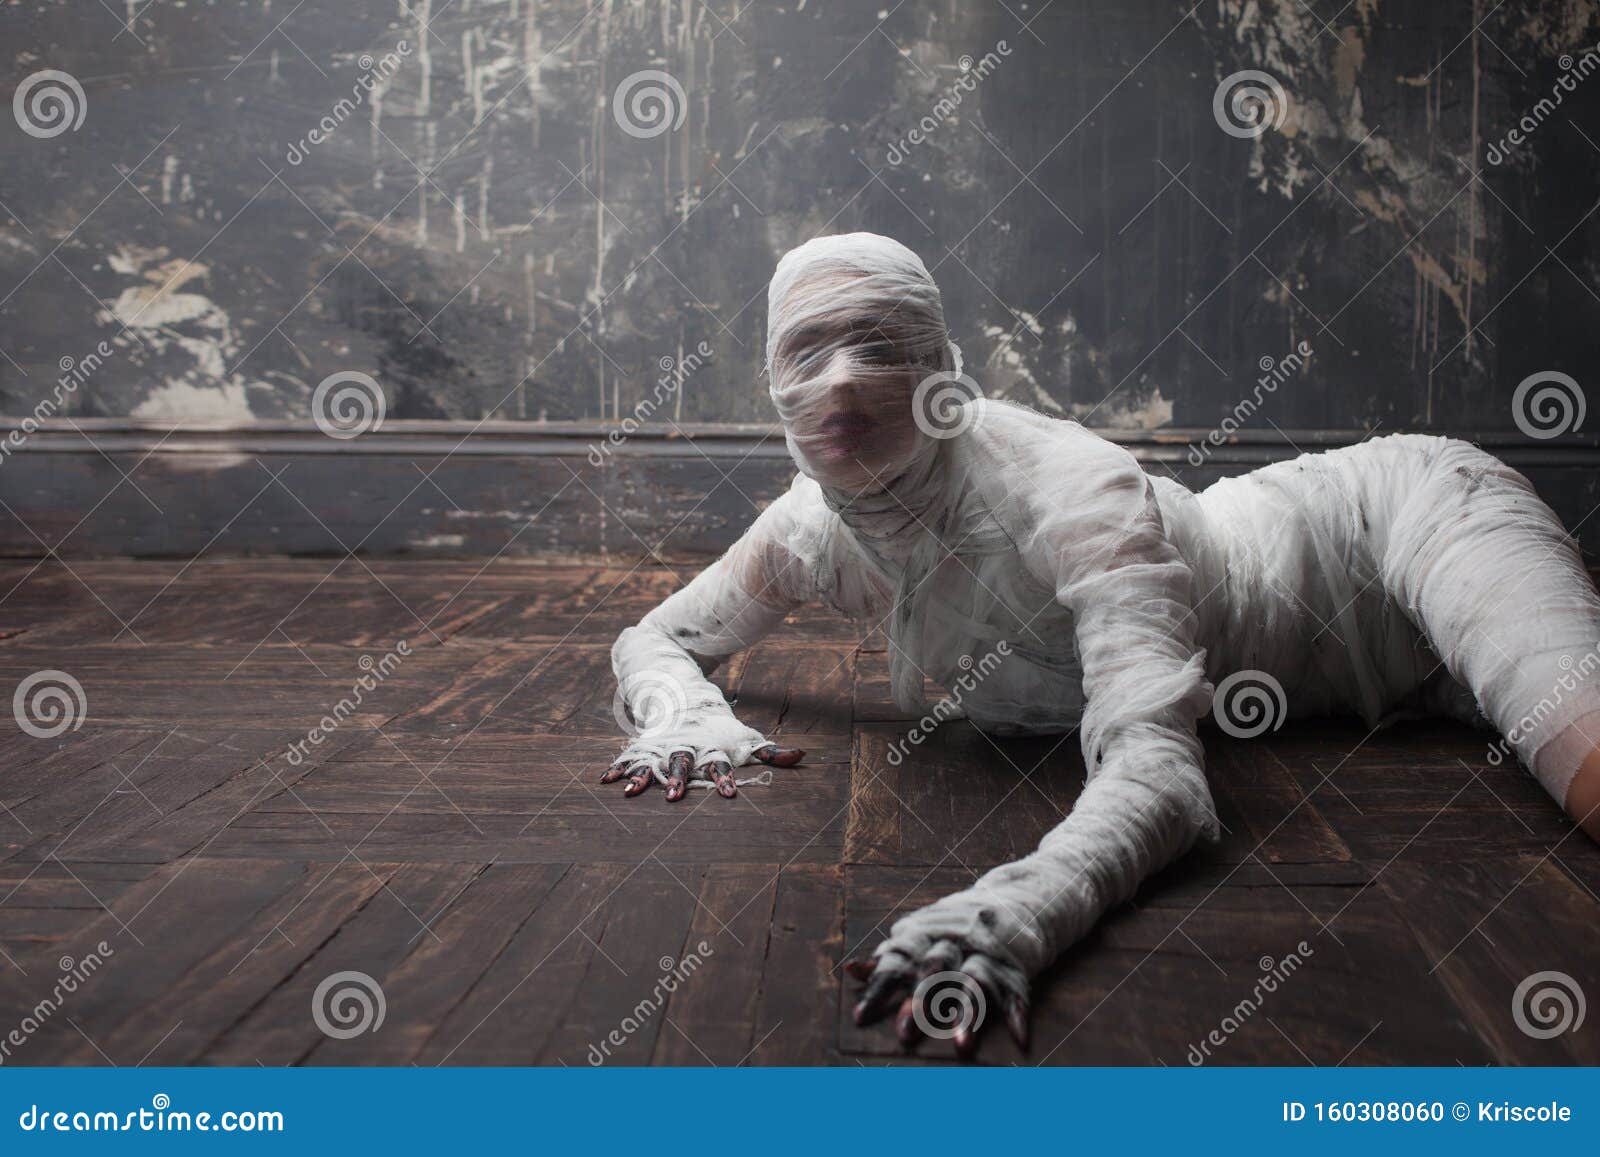 Scary Mummy Creeps On You. The Girl With The Bandage Crawling On The Floor.  Halloween Costume Stock Photo, Picture and Royalty Free Image. Image  129310290.